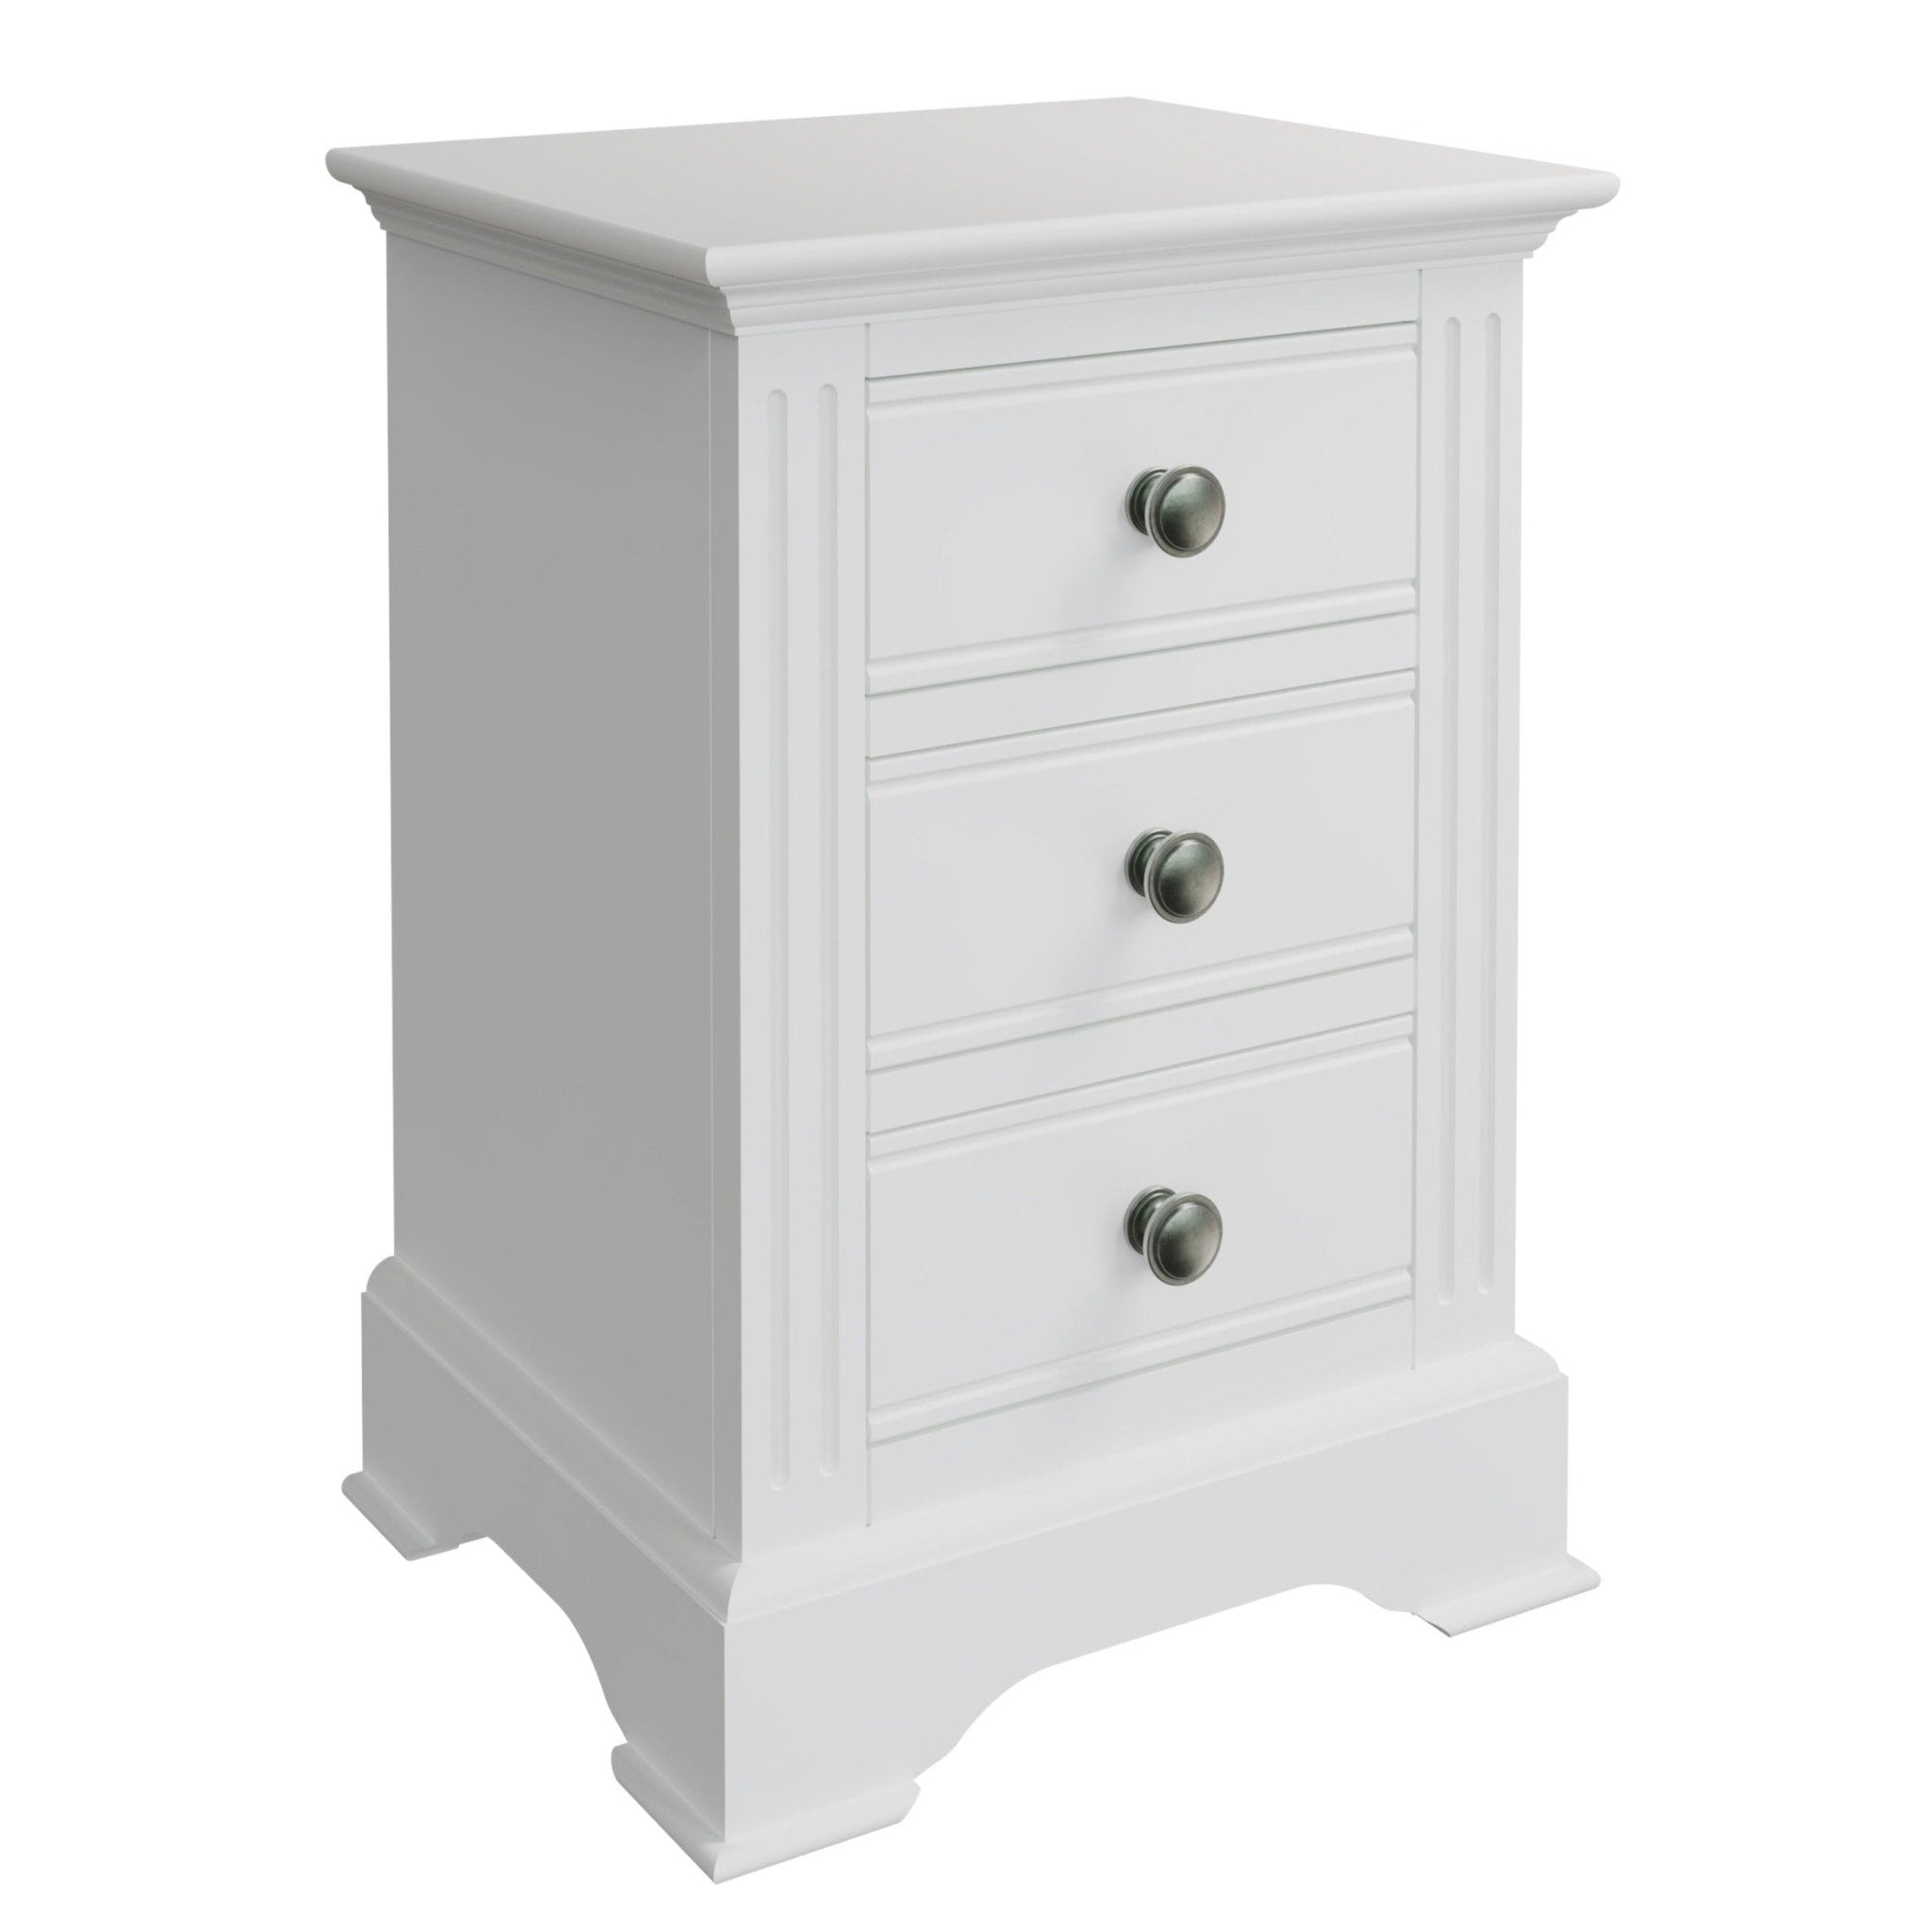 Snowdrop White Painted 3 Drawer Bedside Cabinet - Duck Barn Interiors